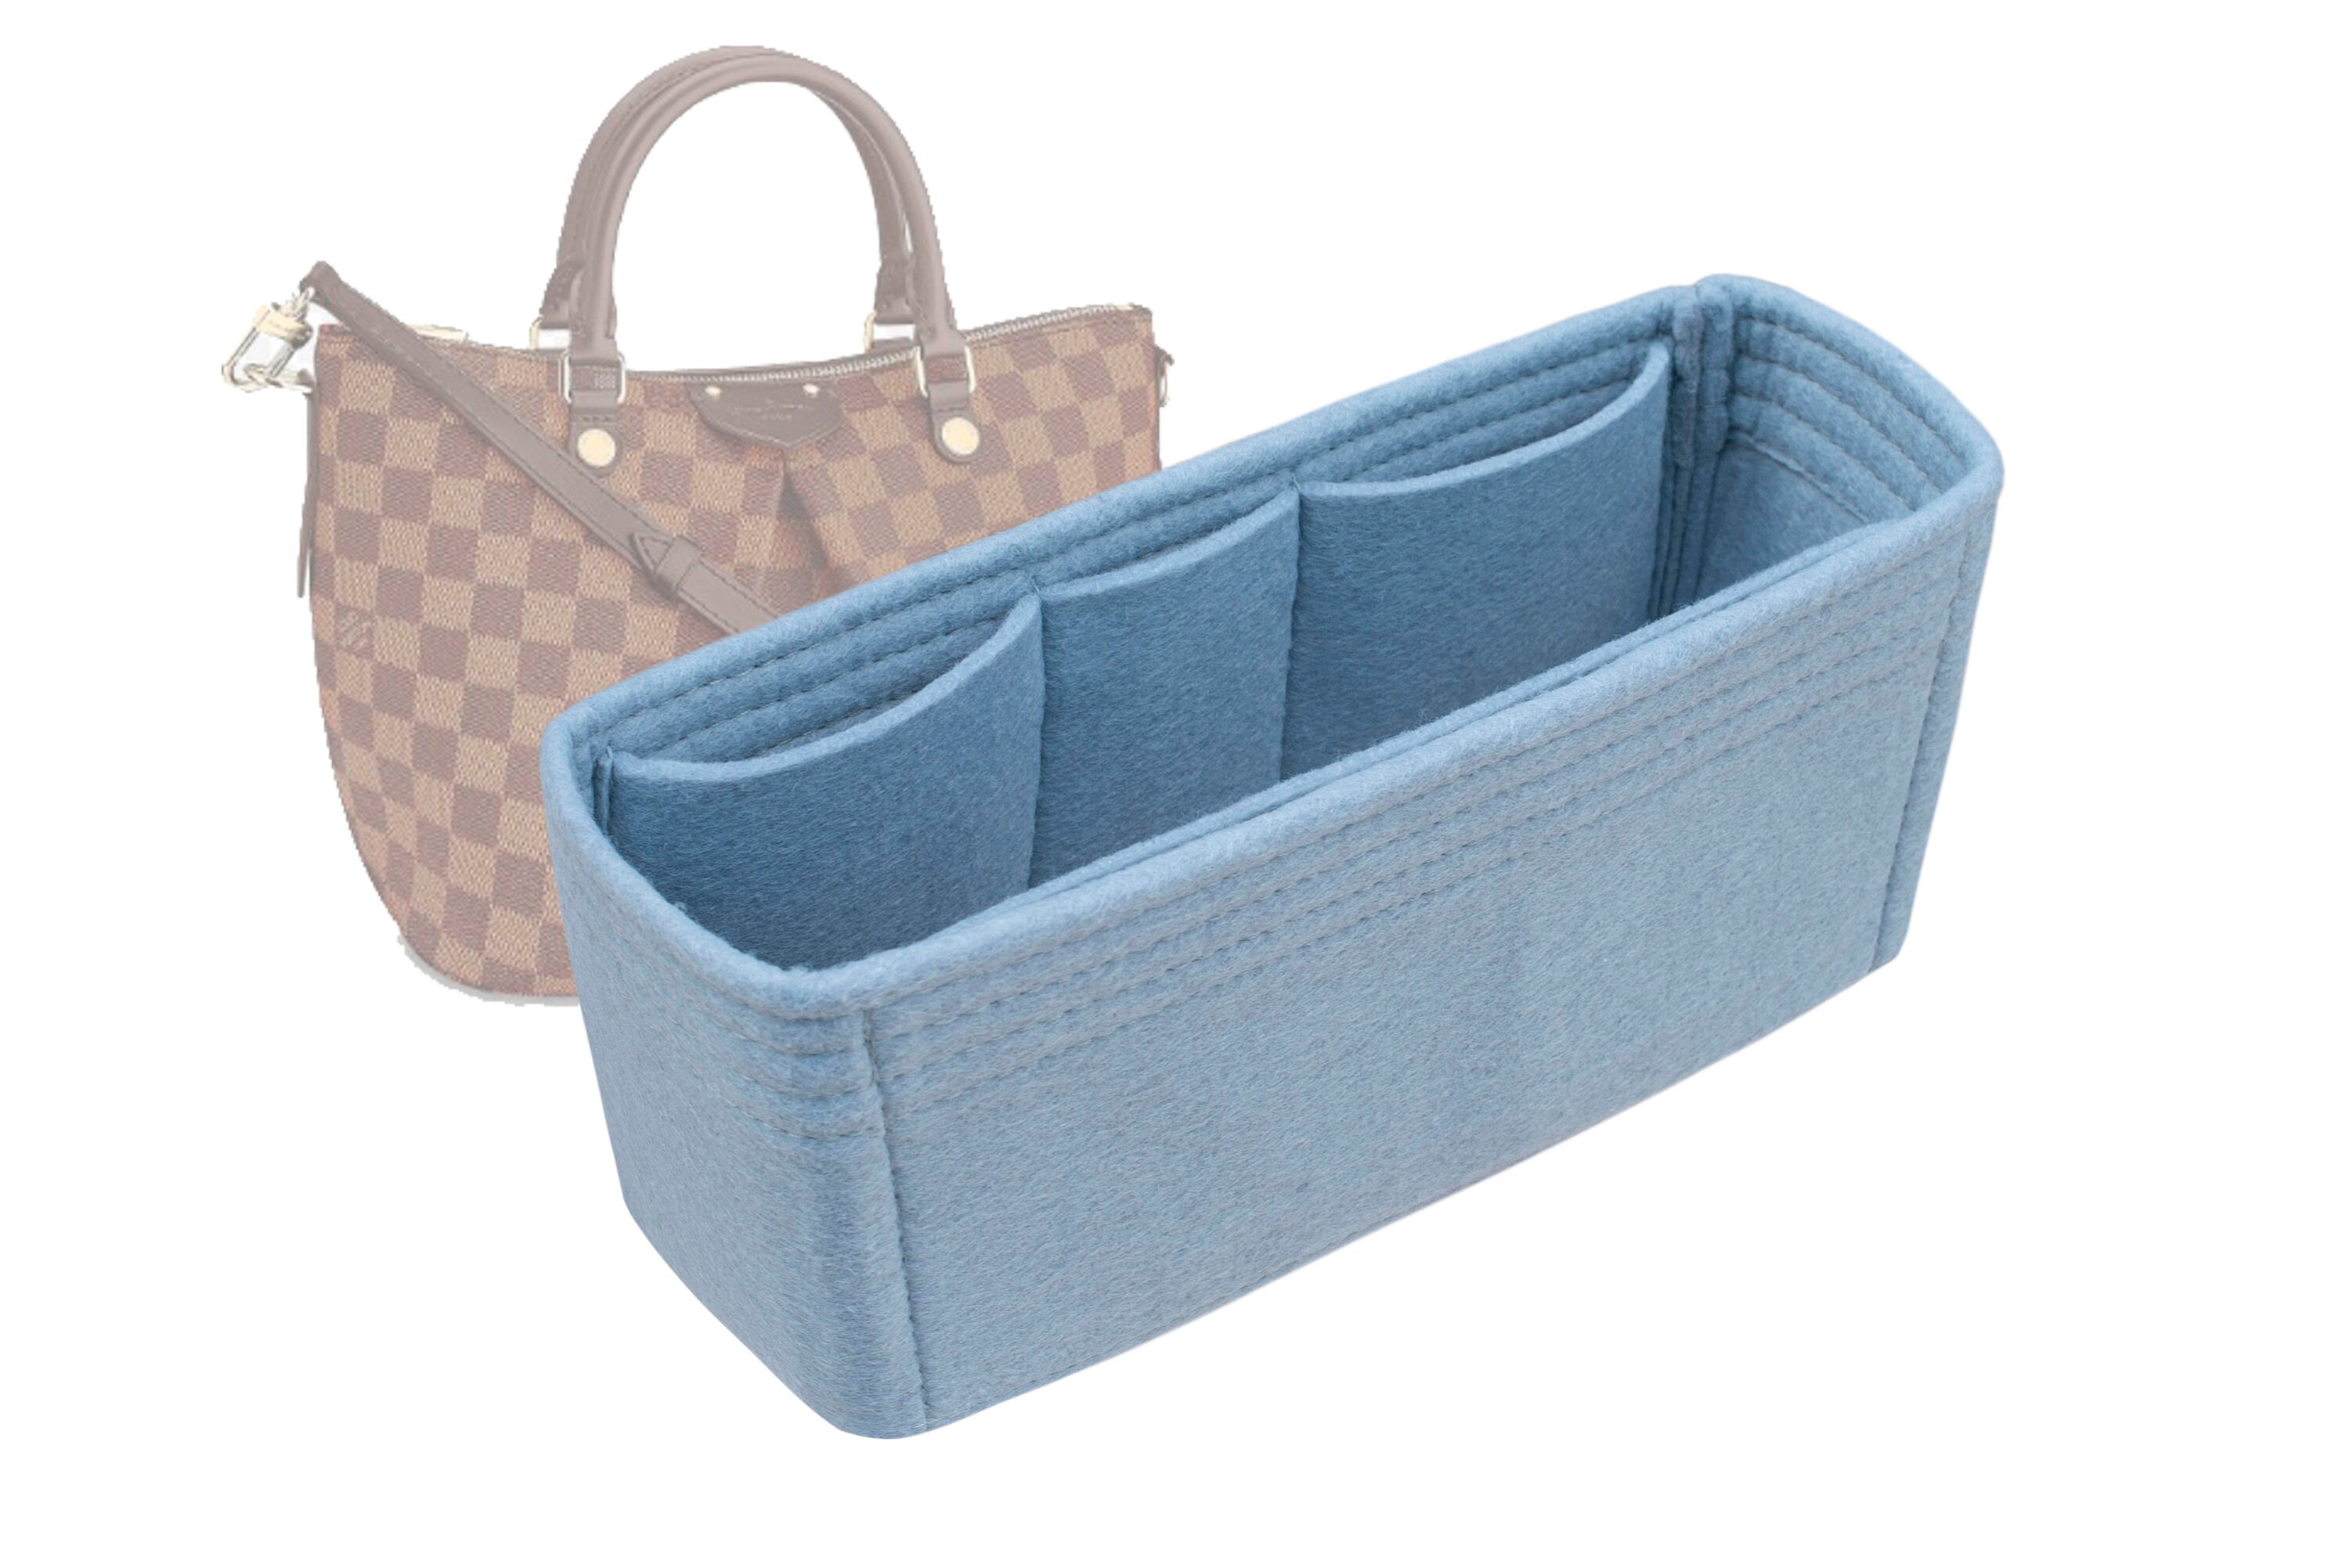 Bag and Purse Organizer with Singular Style for Louis Vuitton Siena PM, MM  and GM